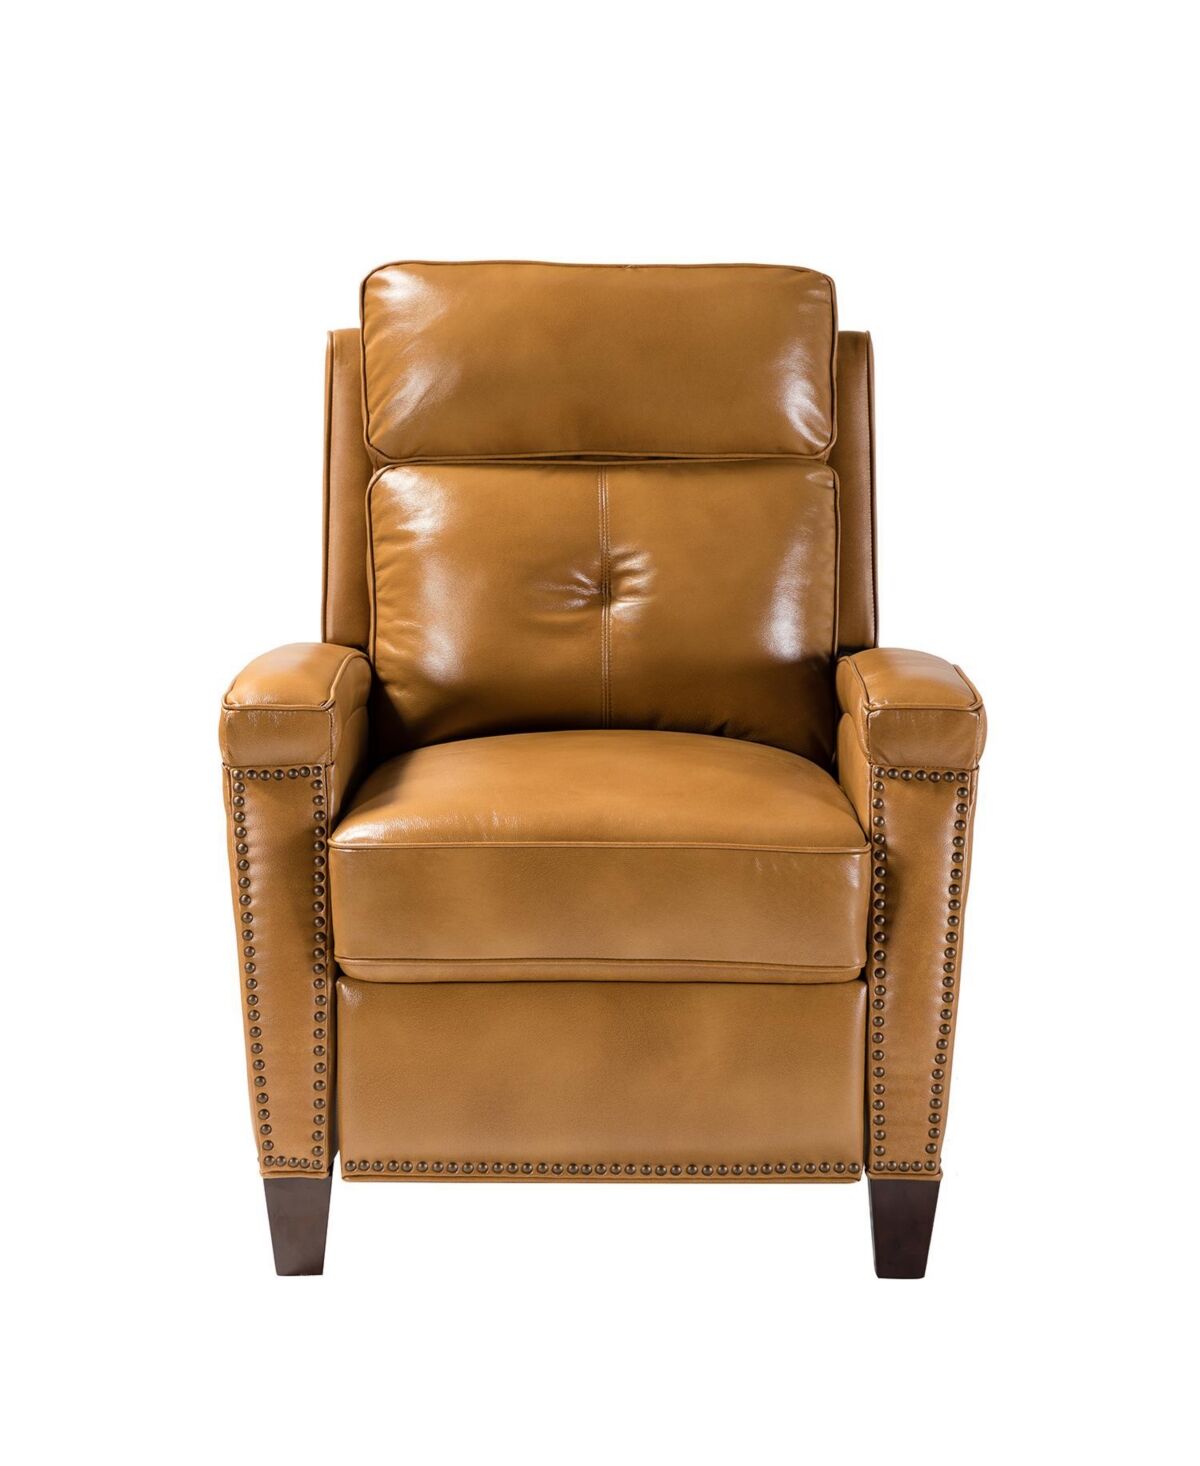 Hulala Home Sickel Modern Retro Recliner Chair for Bedroom Living Room - Camel